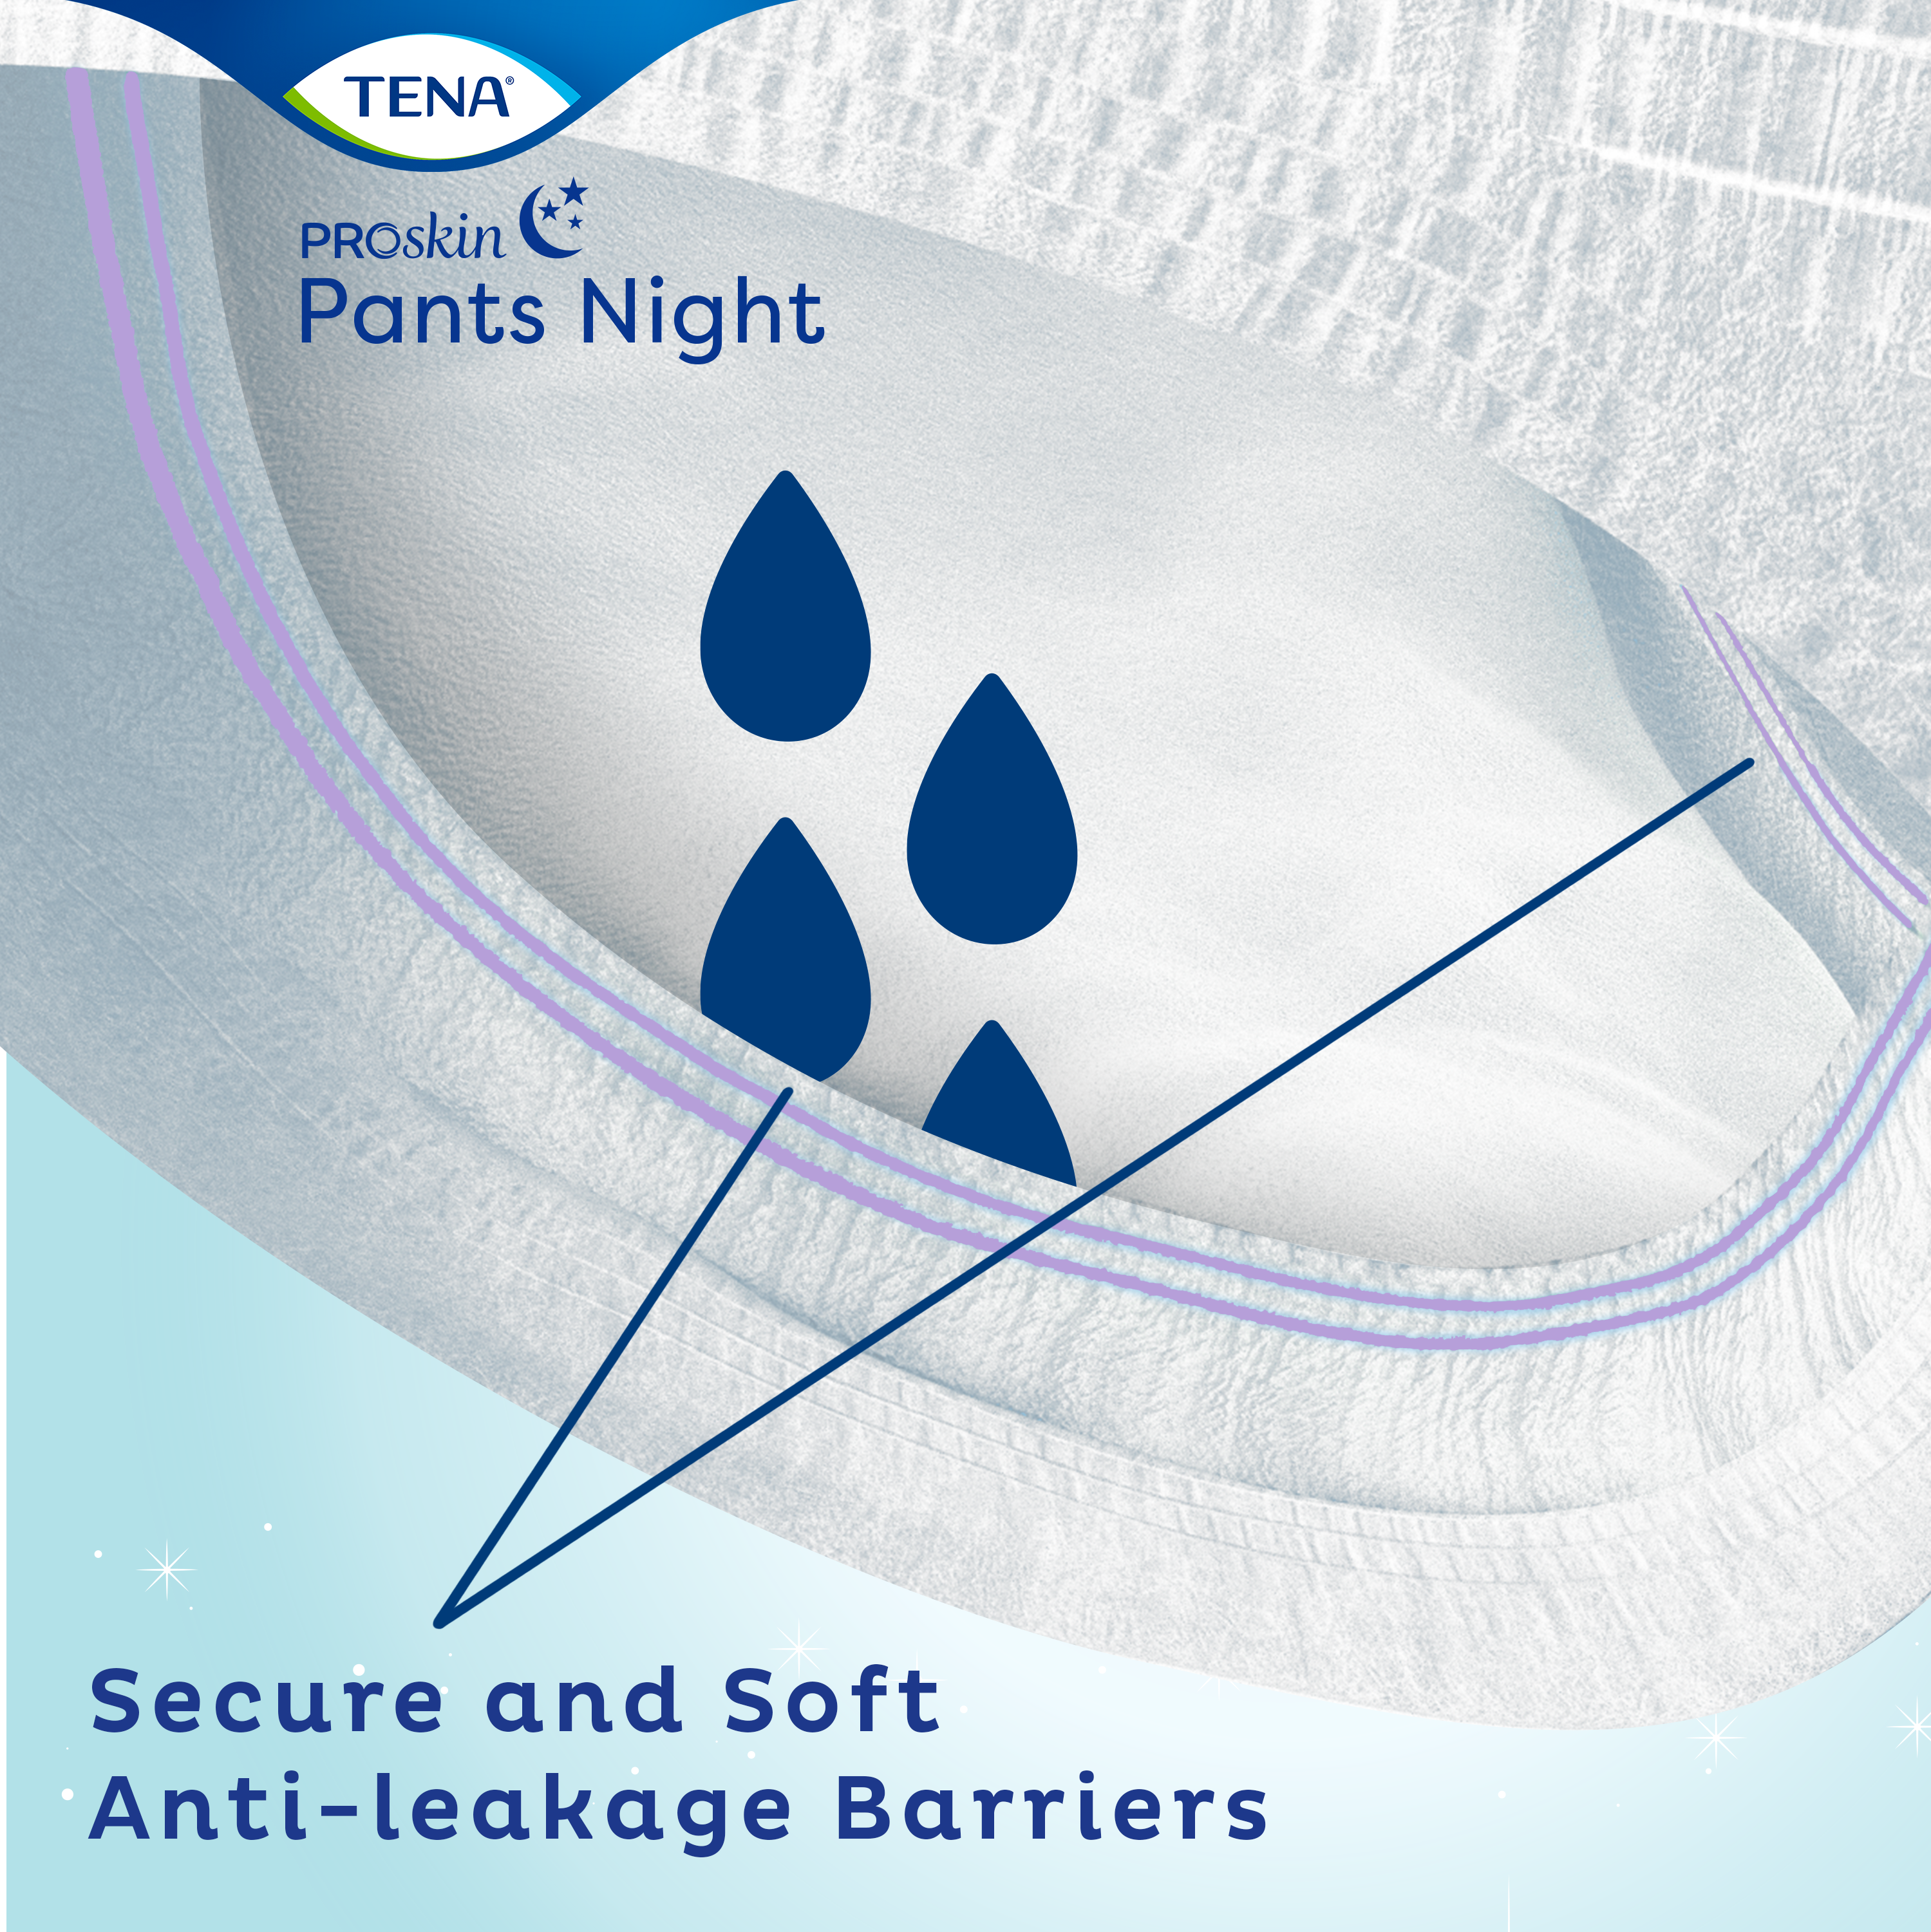 TENA Night incontinence pants with soft anti-leakage barriers for great security